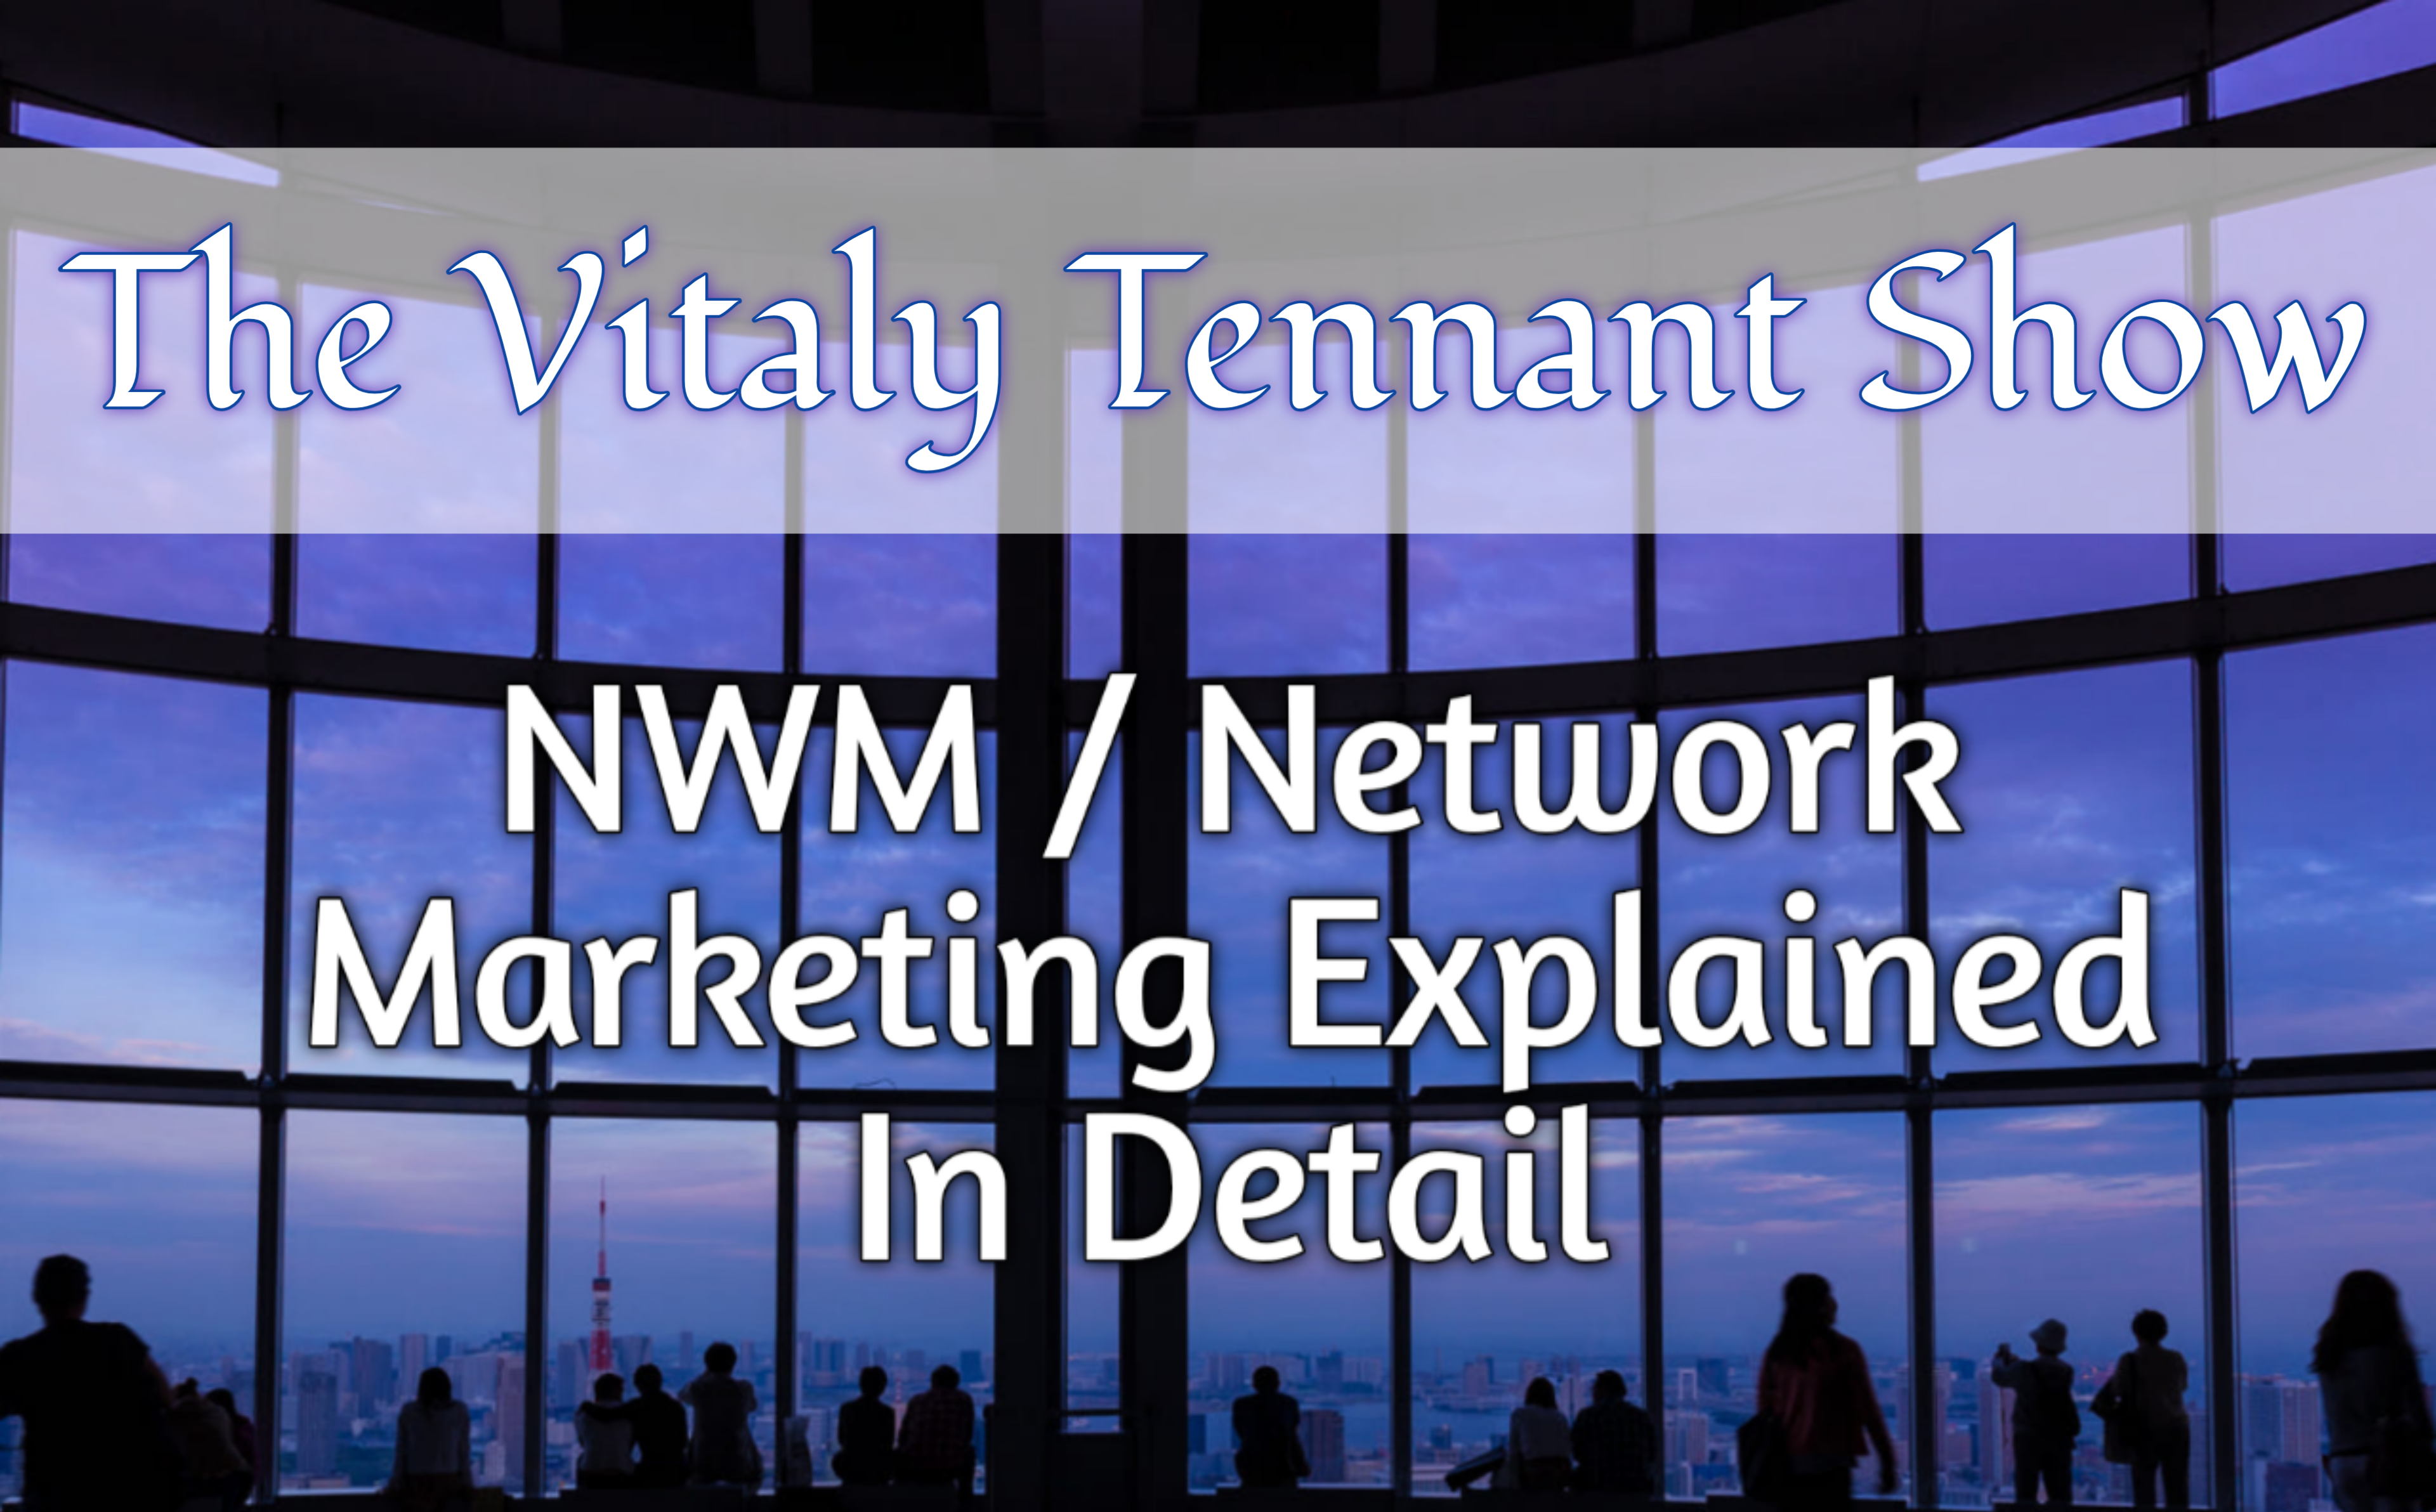 What's all this NWM / Network Marketing stuff anyway?